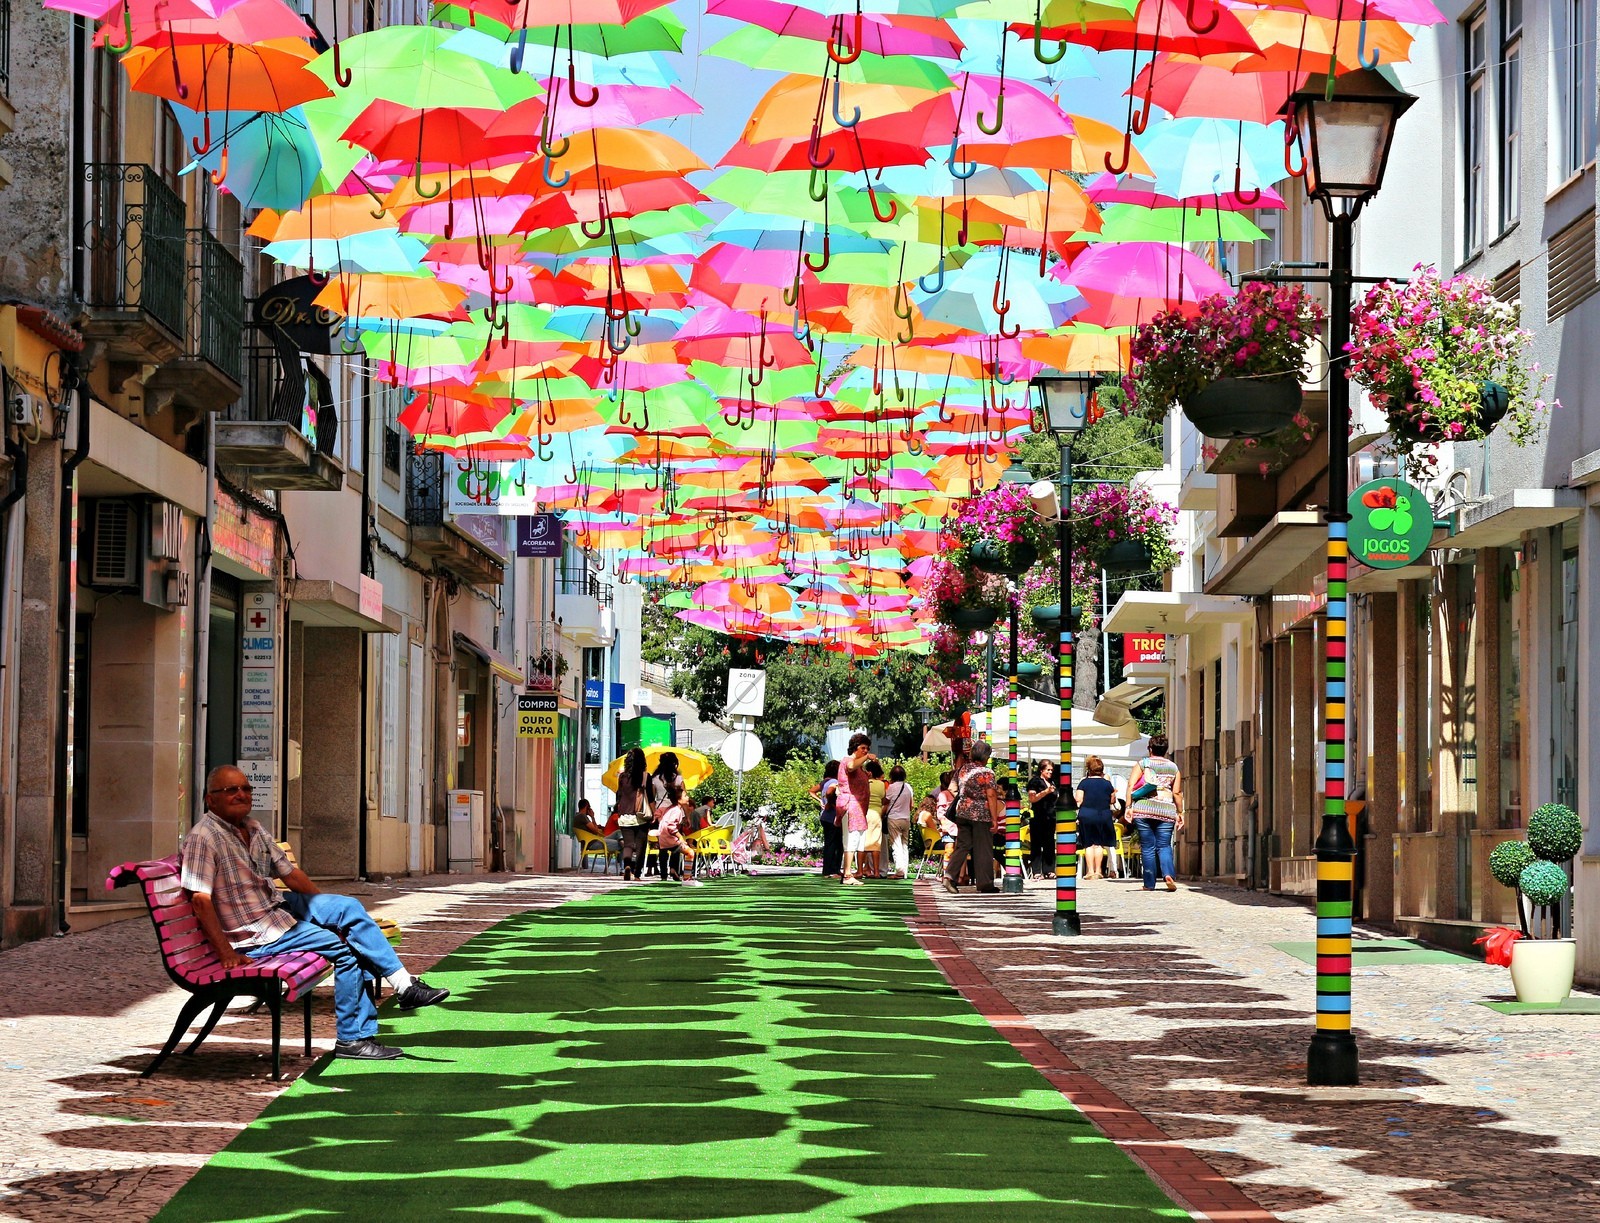 75 places so colorful it's hard to believe they're real [pics]